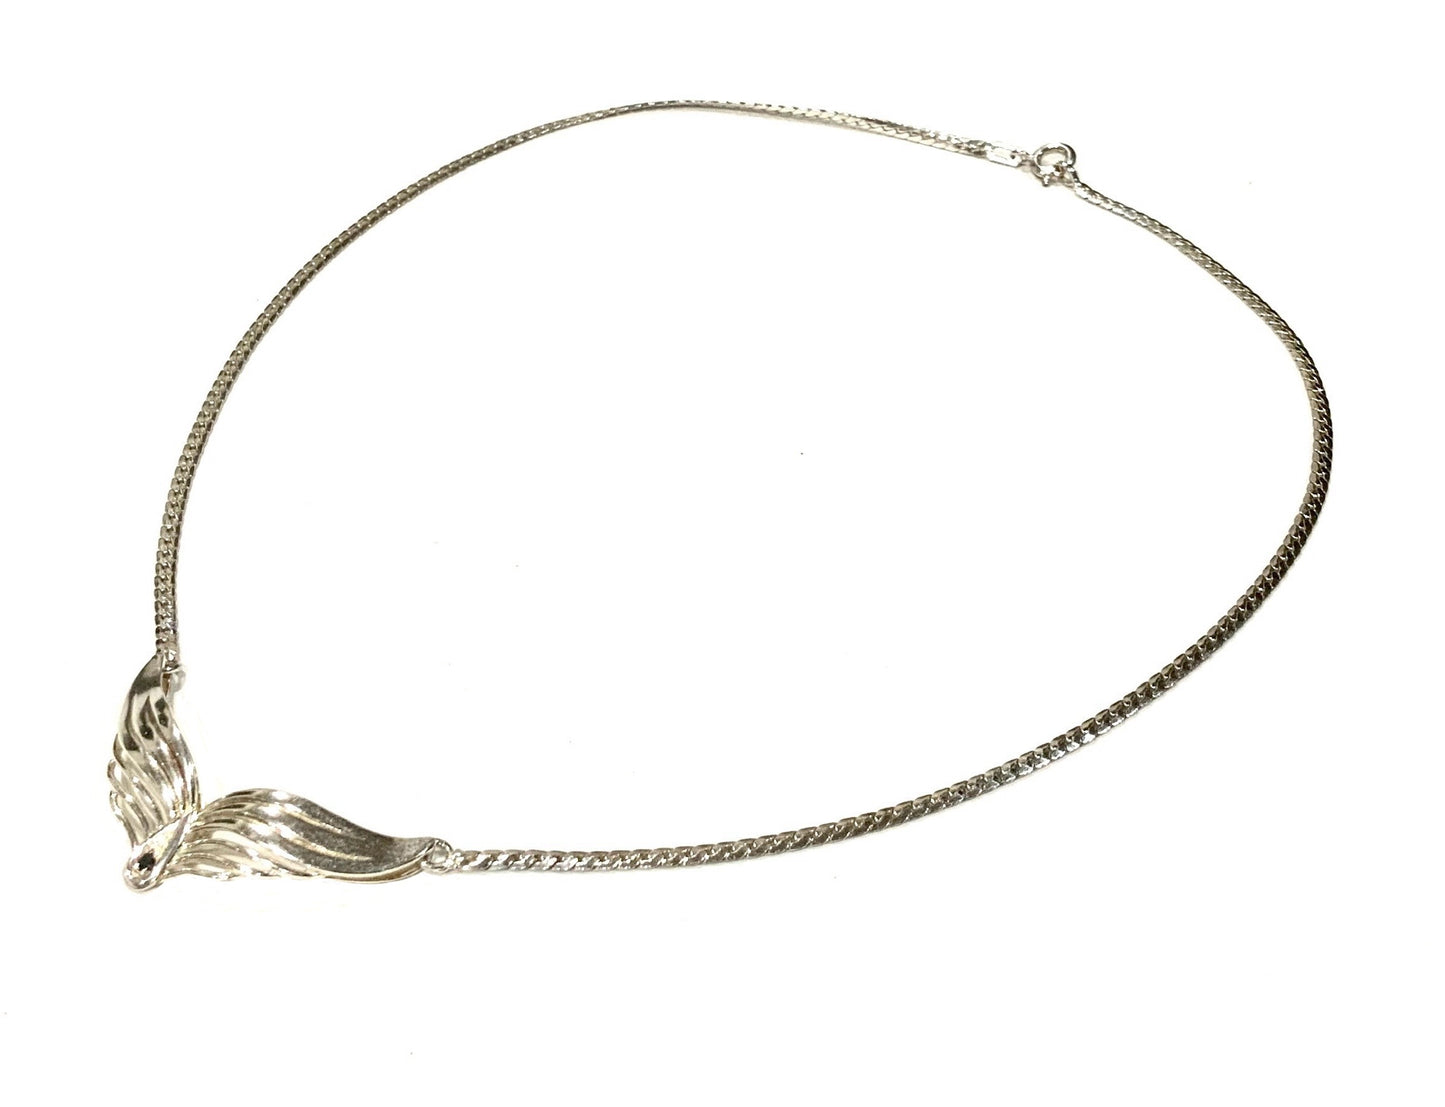 Andreas Daub 925 Sterling Silver Modernist Wings Necklace